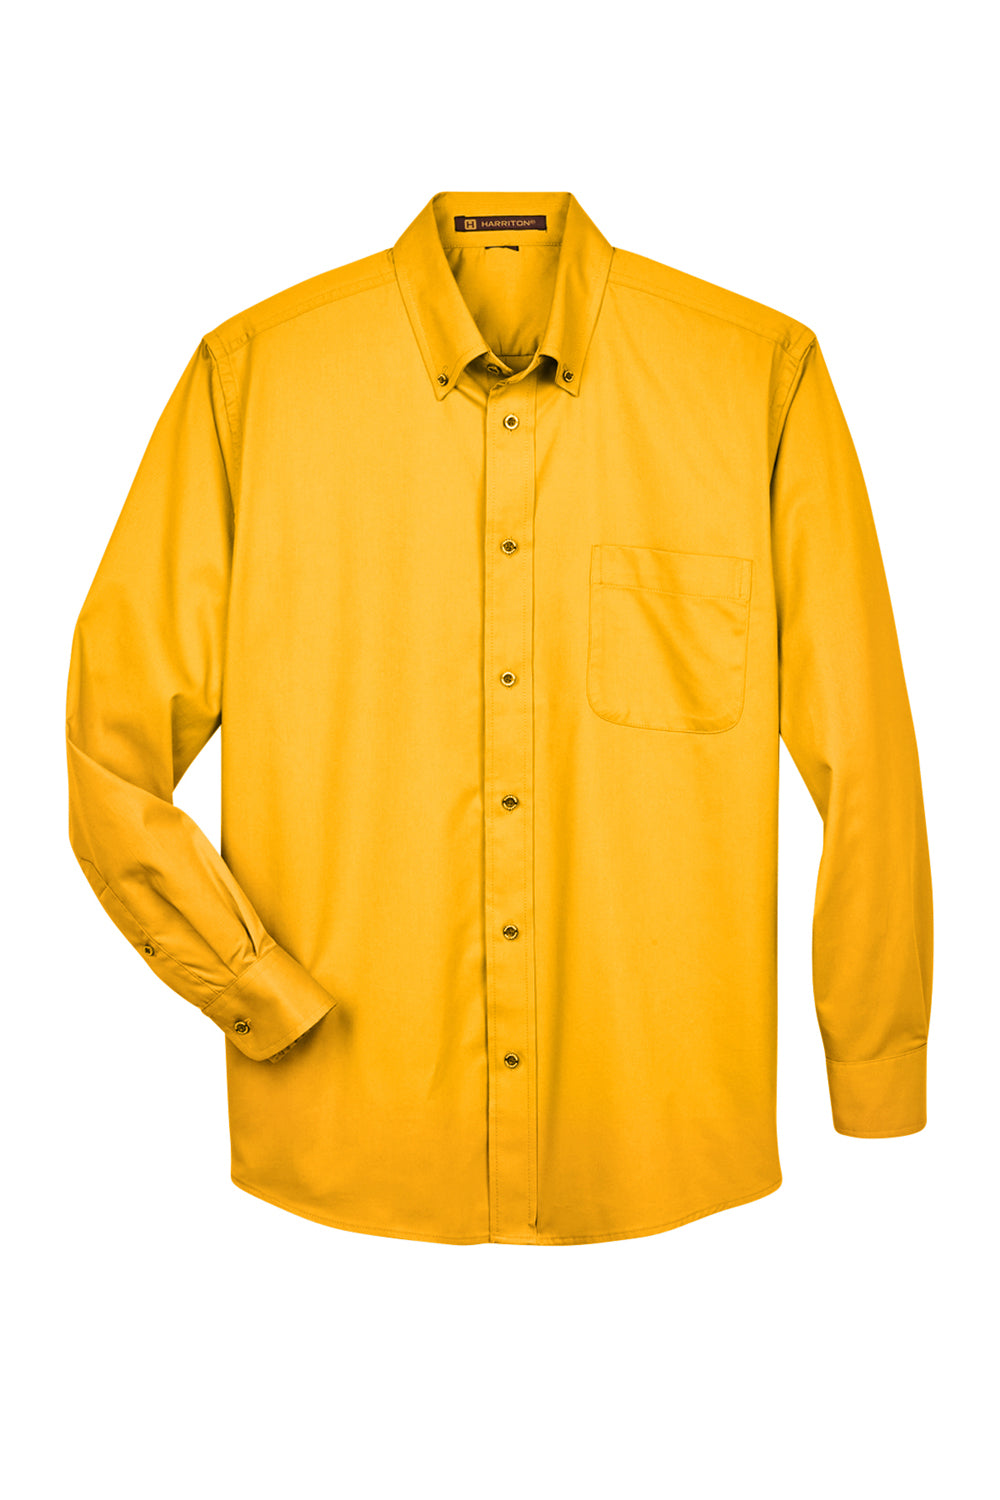 Harriton M500/M500T Wrinkle Resistant Long Sleeve Button Down Shirt w/ Pocket Sunray Yellow Flat Front